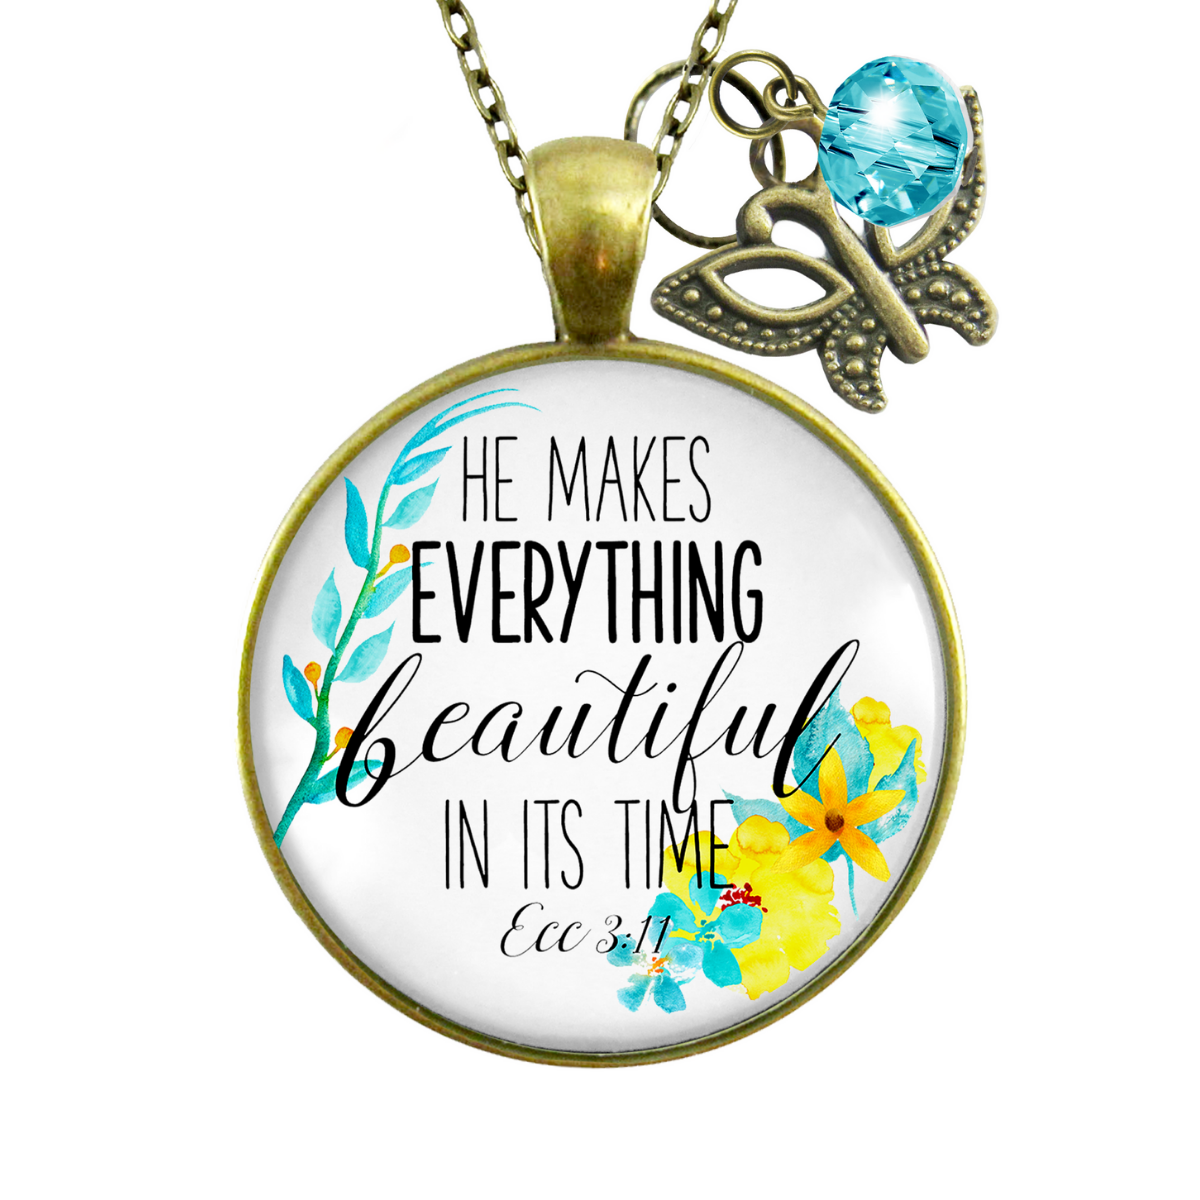 Gutsy Goodness He Makes Everything Beautiful Necklace Christian Watercolor Jewelry - Gutsy Goodness Handmade Jewelry;He Makes Everything Beautiful Necklace Christian Watercolor Jewelry - Gutsy Goodness Handmade Jewelry Gifts